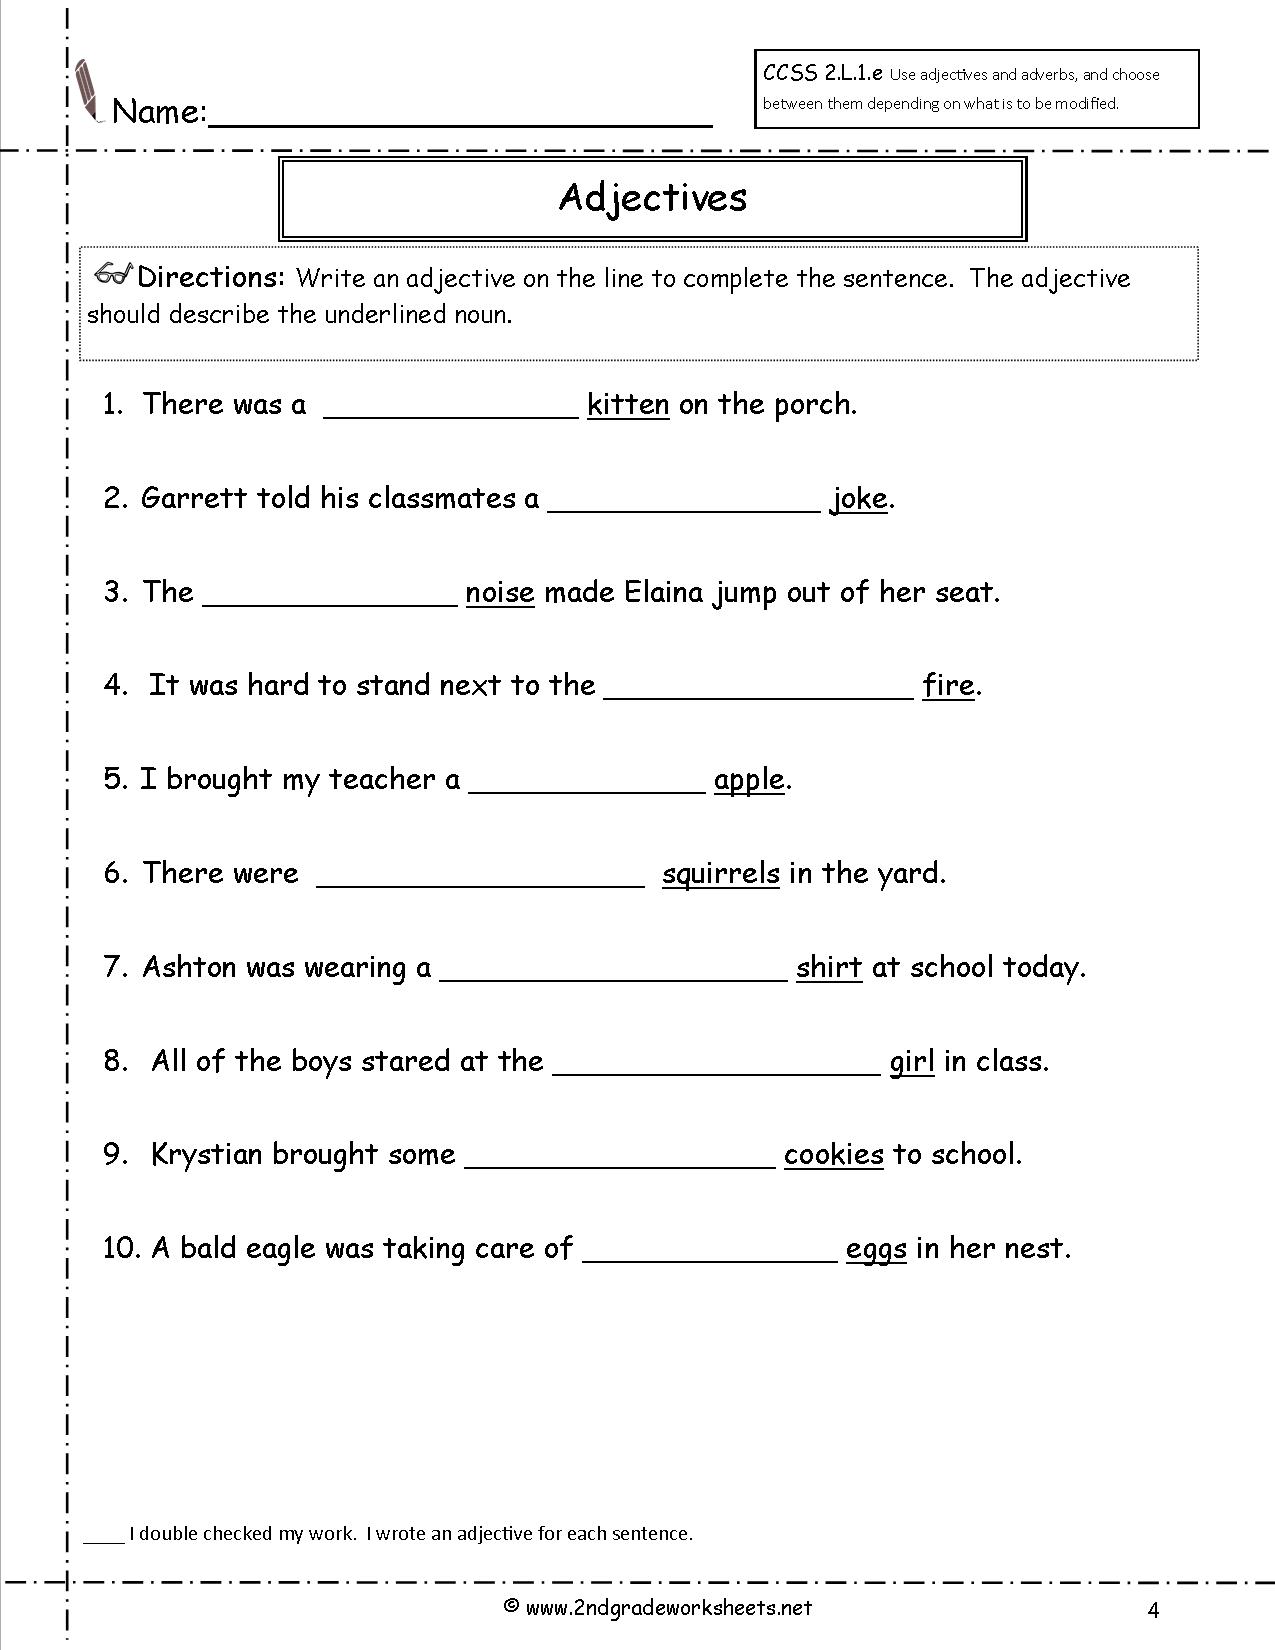 adjective-and-its-kinds-worksheets-adjectiveworksheets